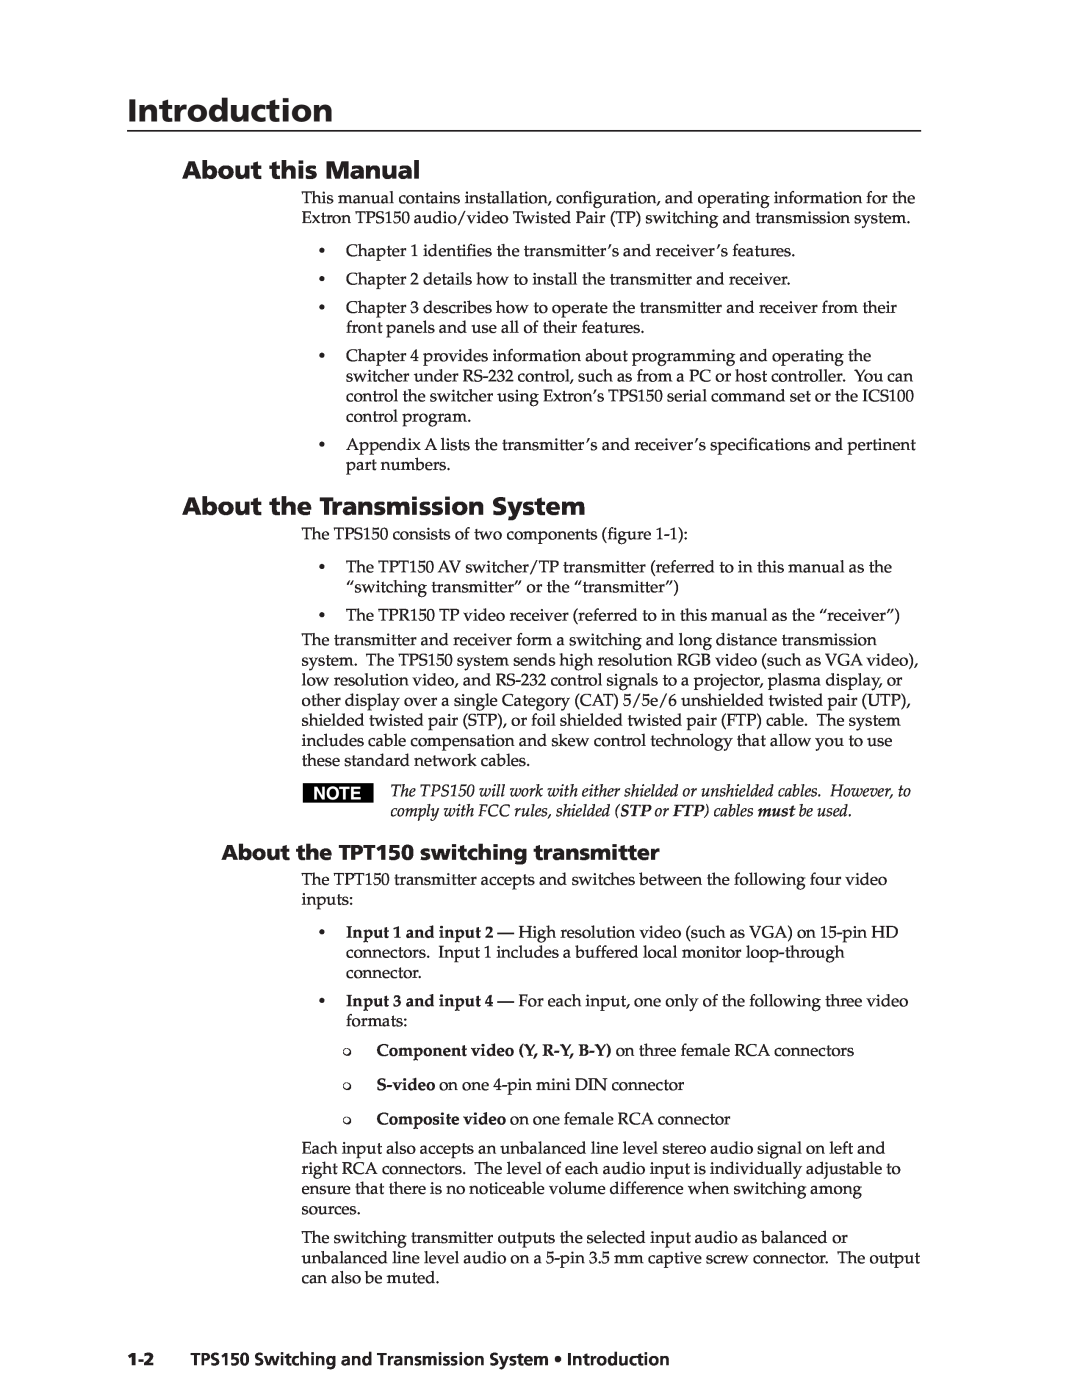 Extron electronic TPS150 manual Introductiontroduction, cont’d, About this Manual, About the Transmission System 